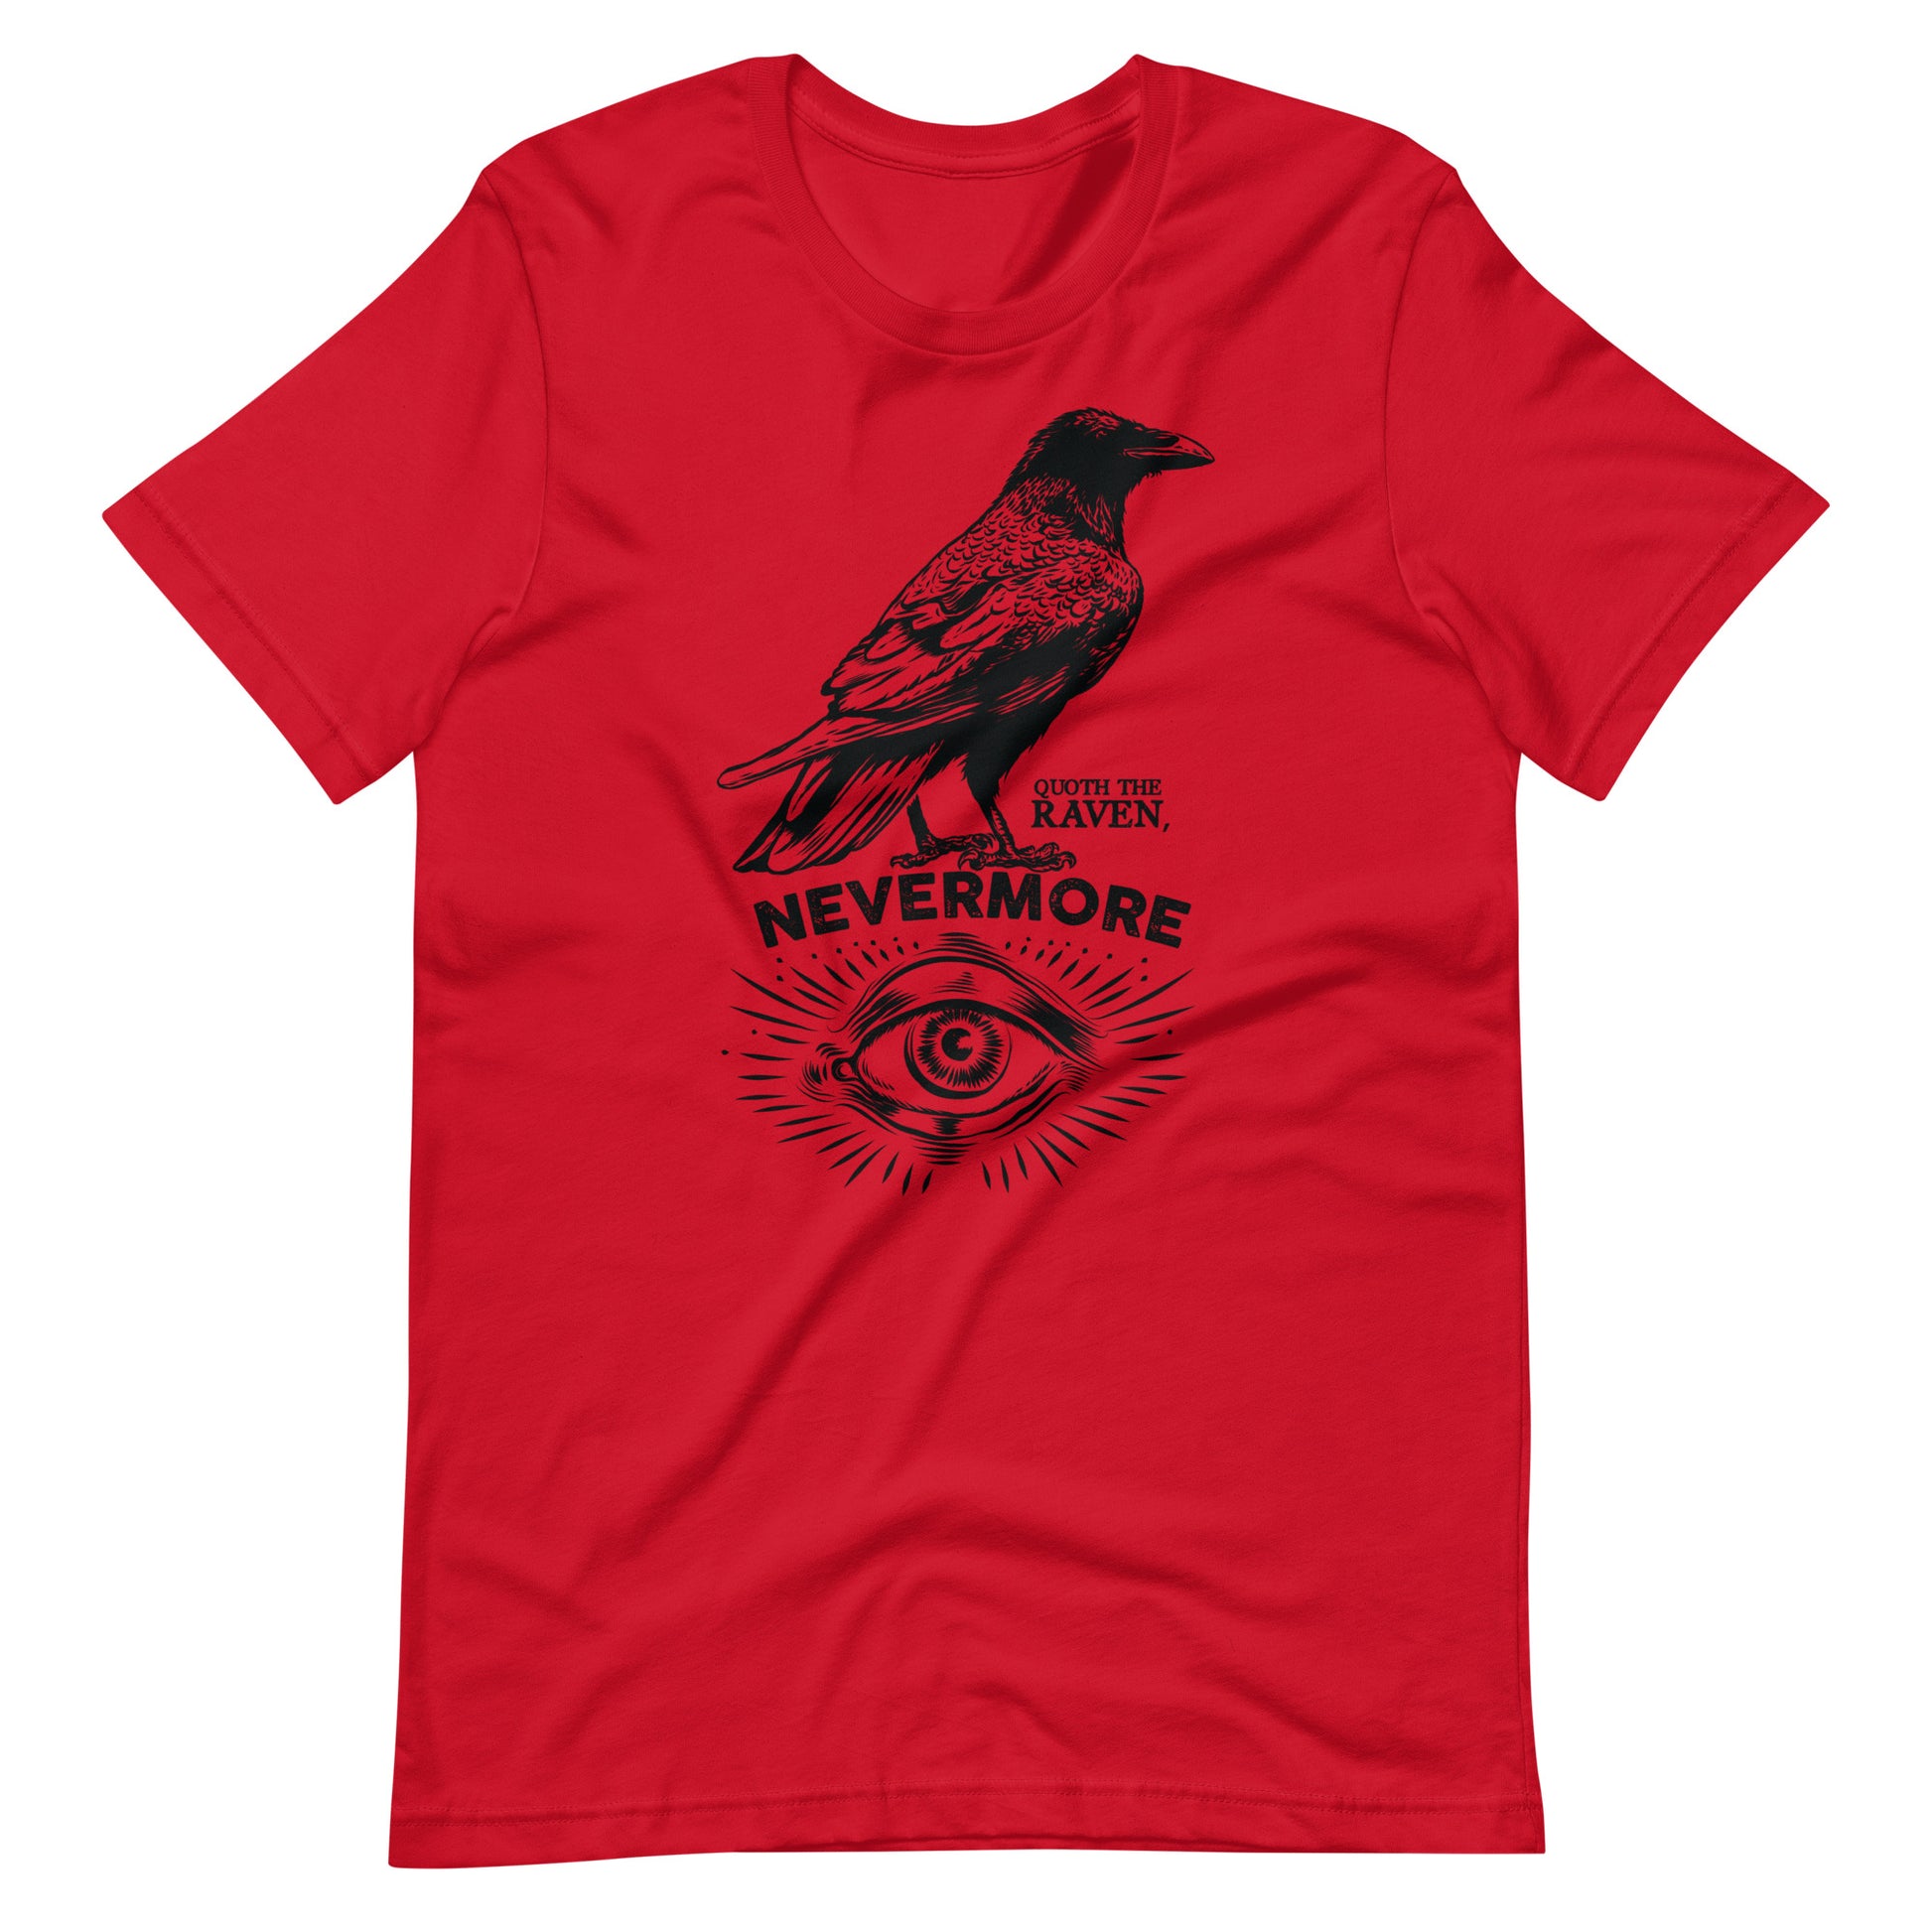 Quoth the Raven Nevermore - Men's t-shirt - Red Front